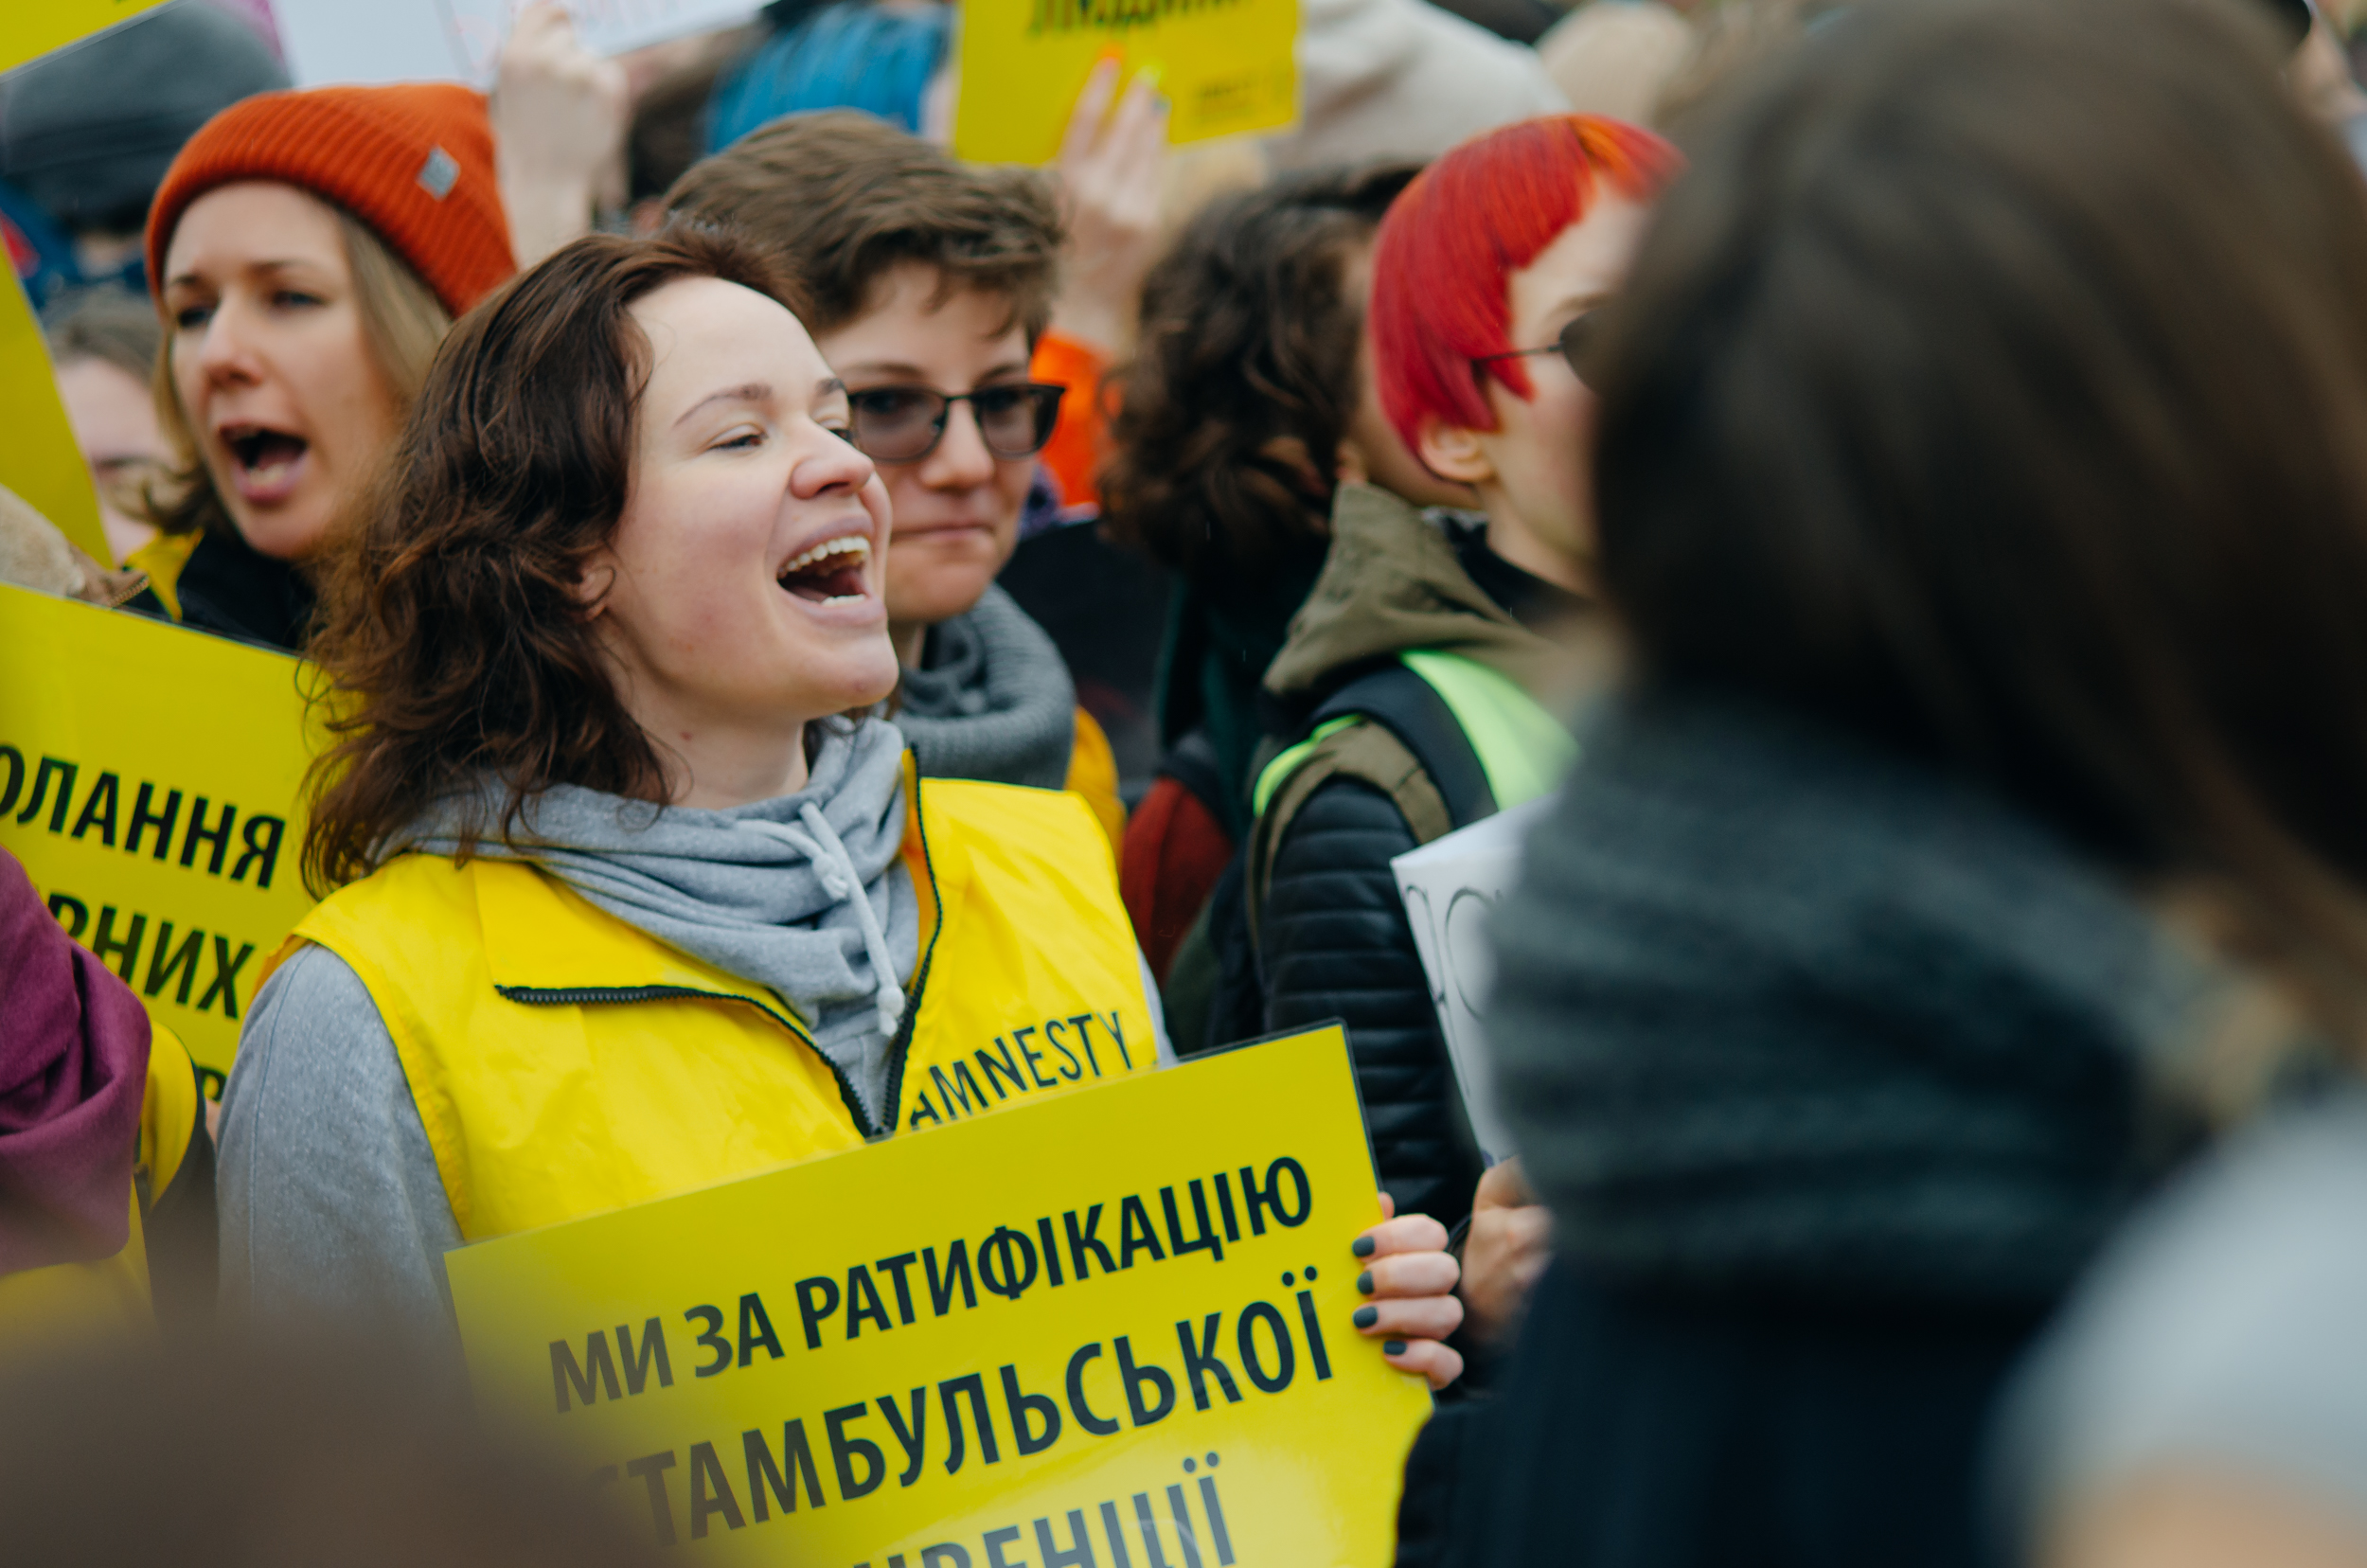 Ukraine: “Historic victory for women’s rights” as Istanbul Convention ratified